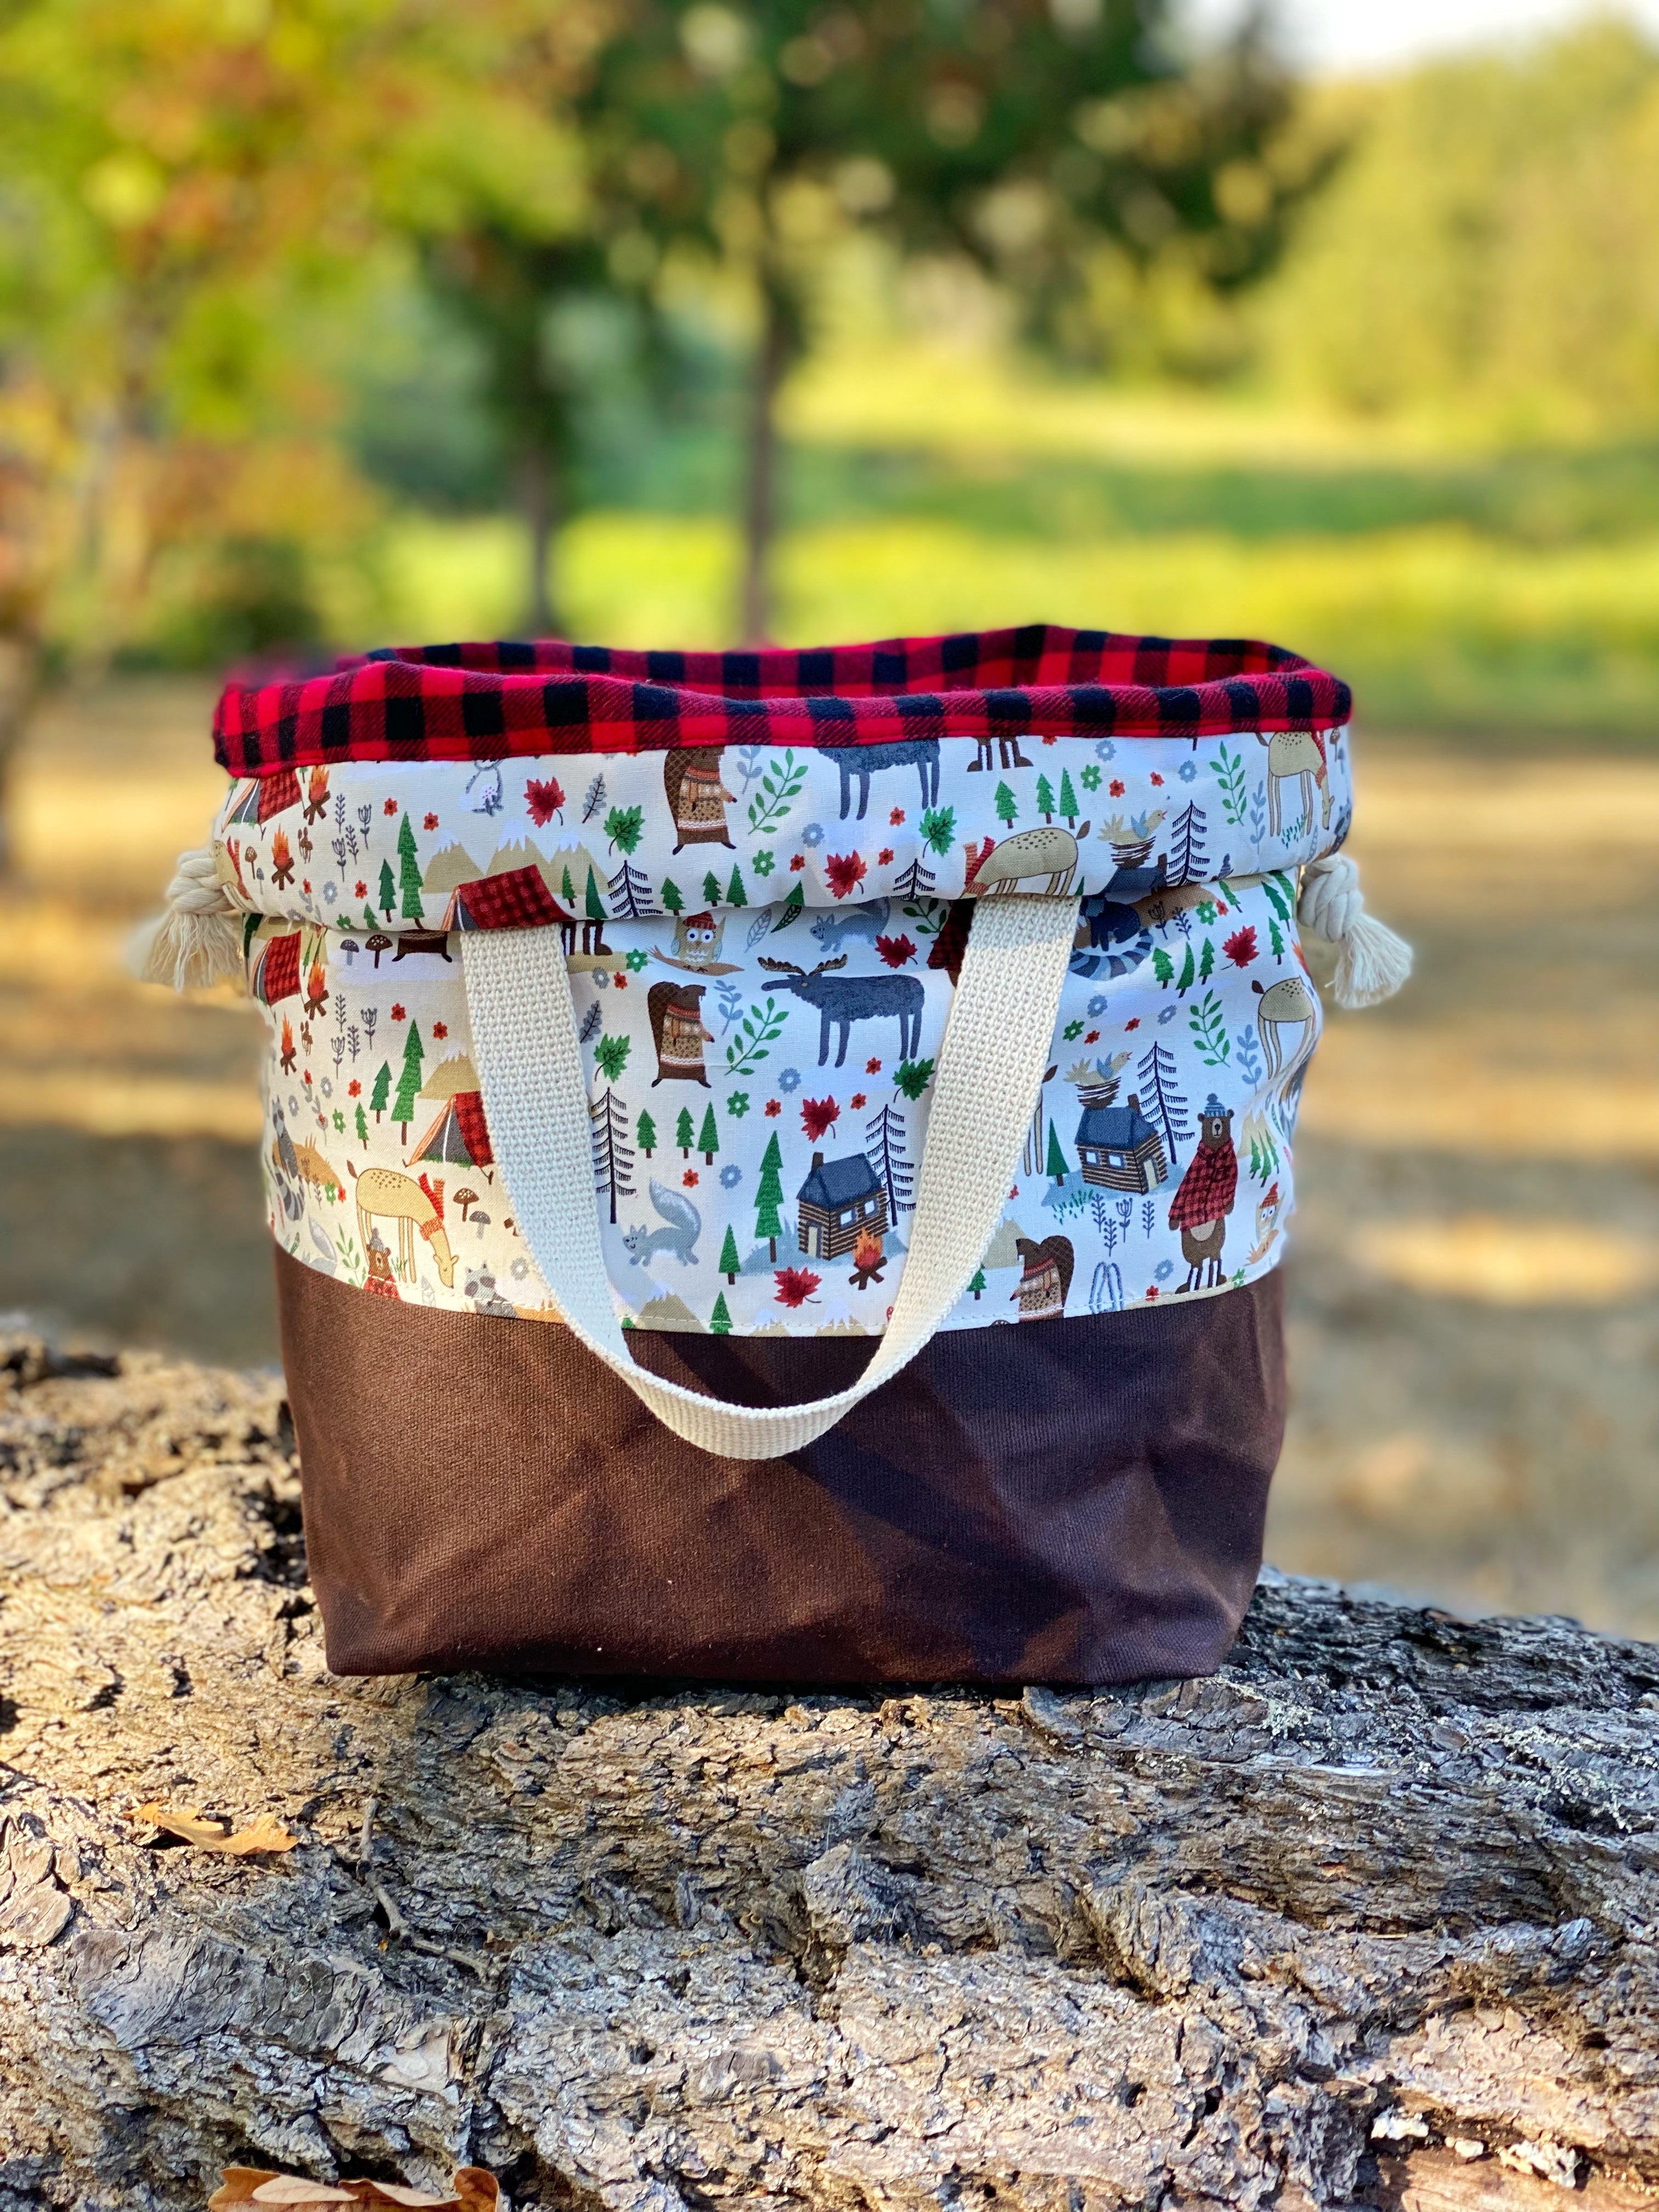 Wilderness Forest Buffalo Plaid and Brown Waxed Canvas Knit Crochet Leather Drawstring Tote Project Flat Bottom Bag